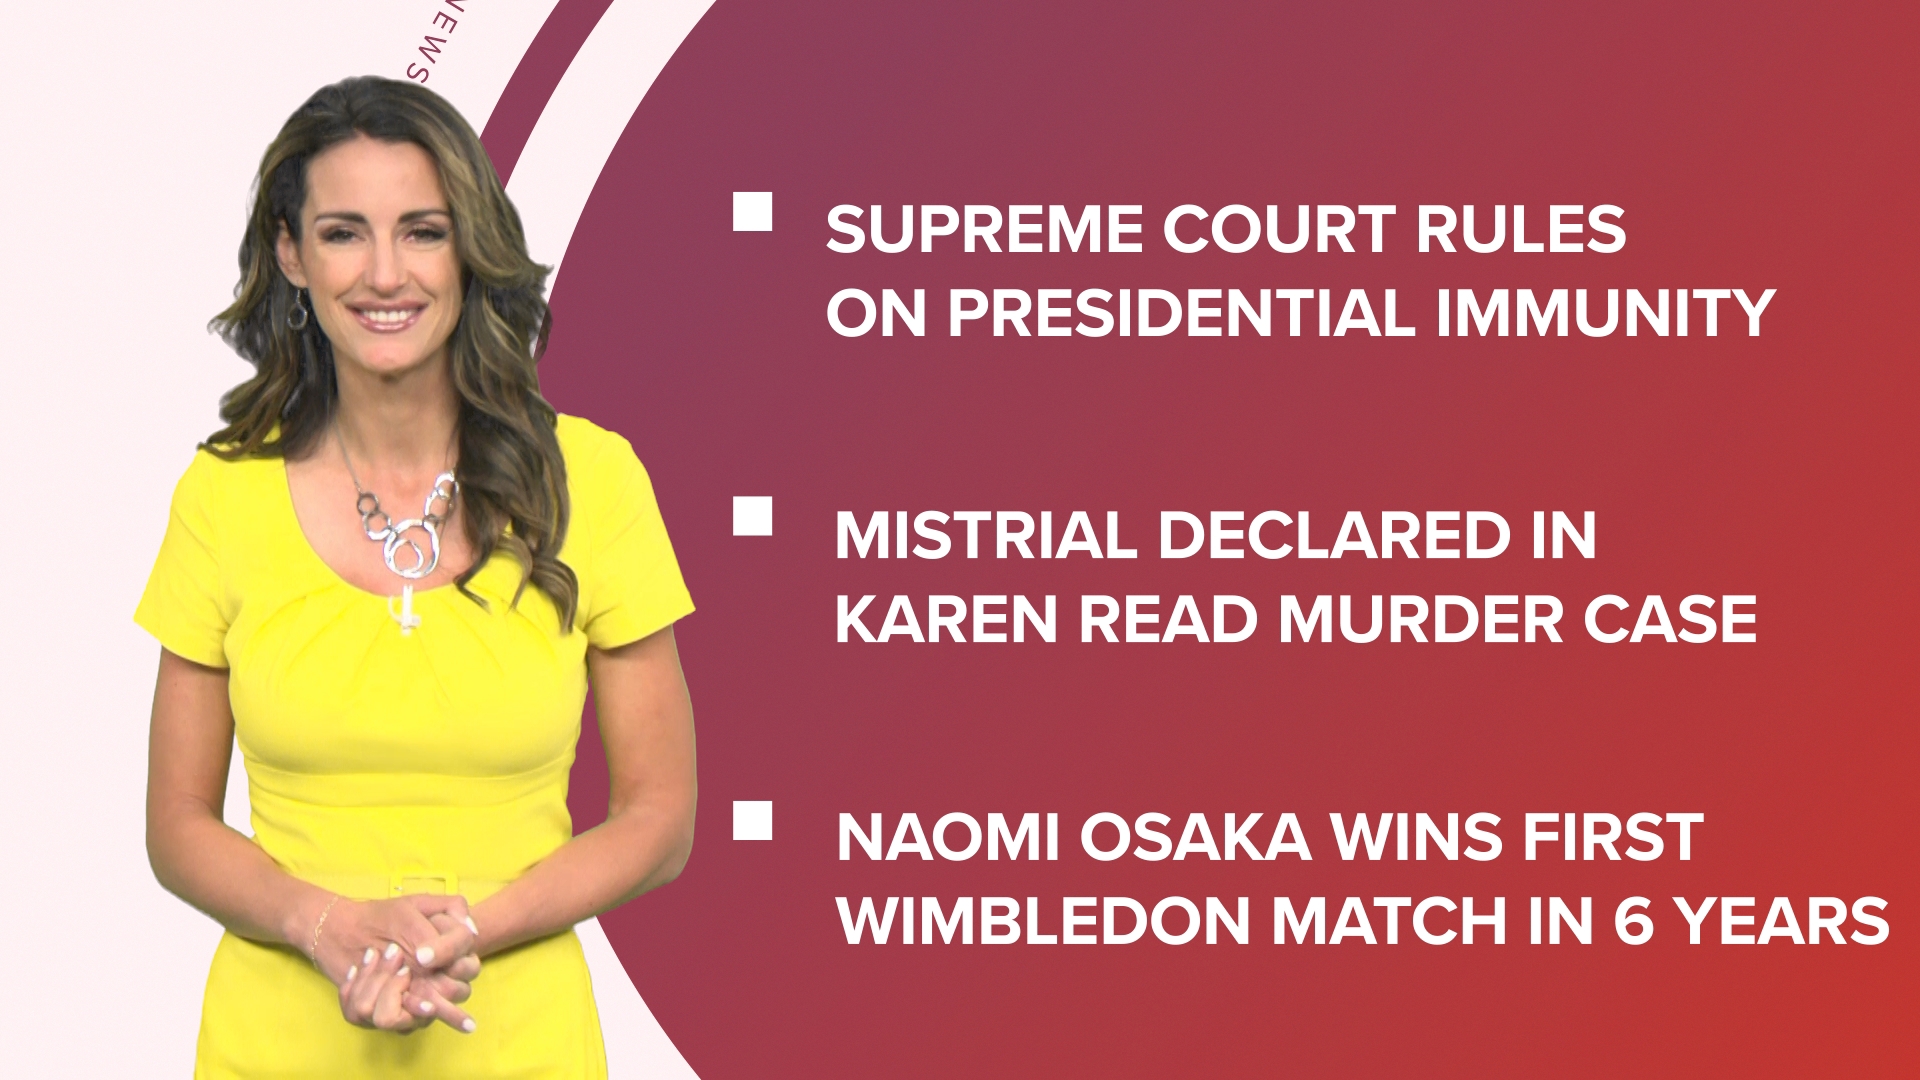 A look at what is happening in the news from Supreme Court ruling on presidential immunity to firework safety amid fire risks and Wimbledon updates.